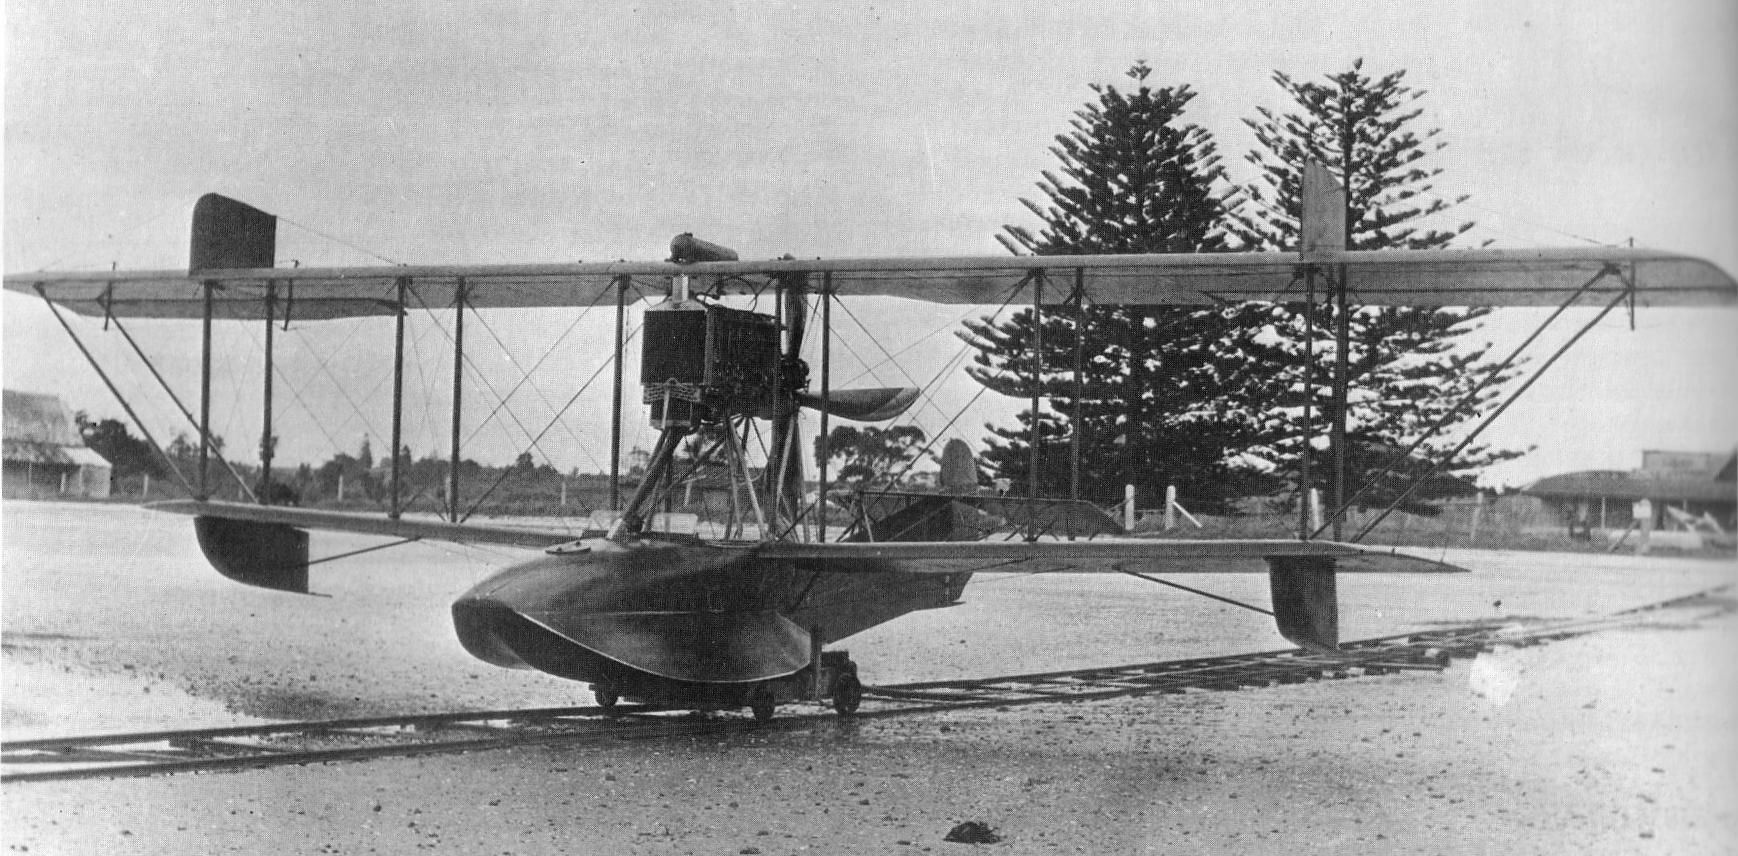 Type D flying boat, piloted by the Walsh brothers